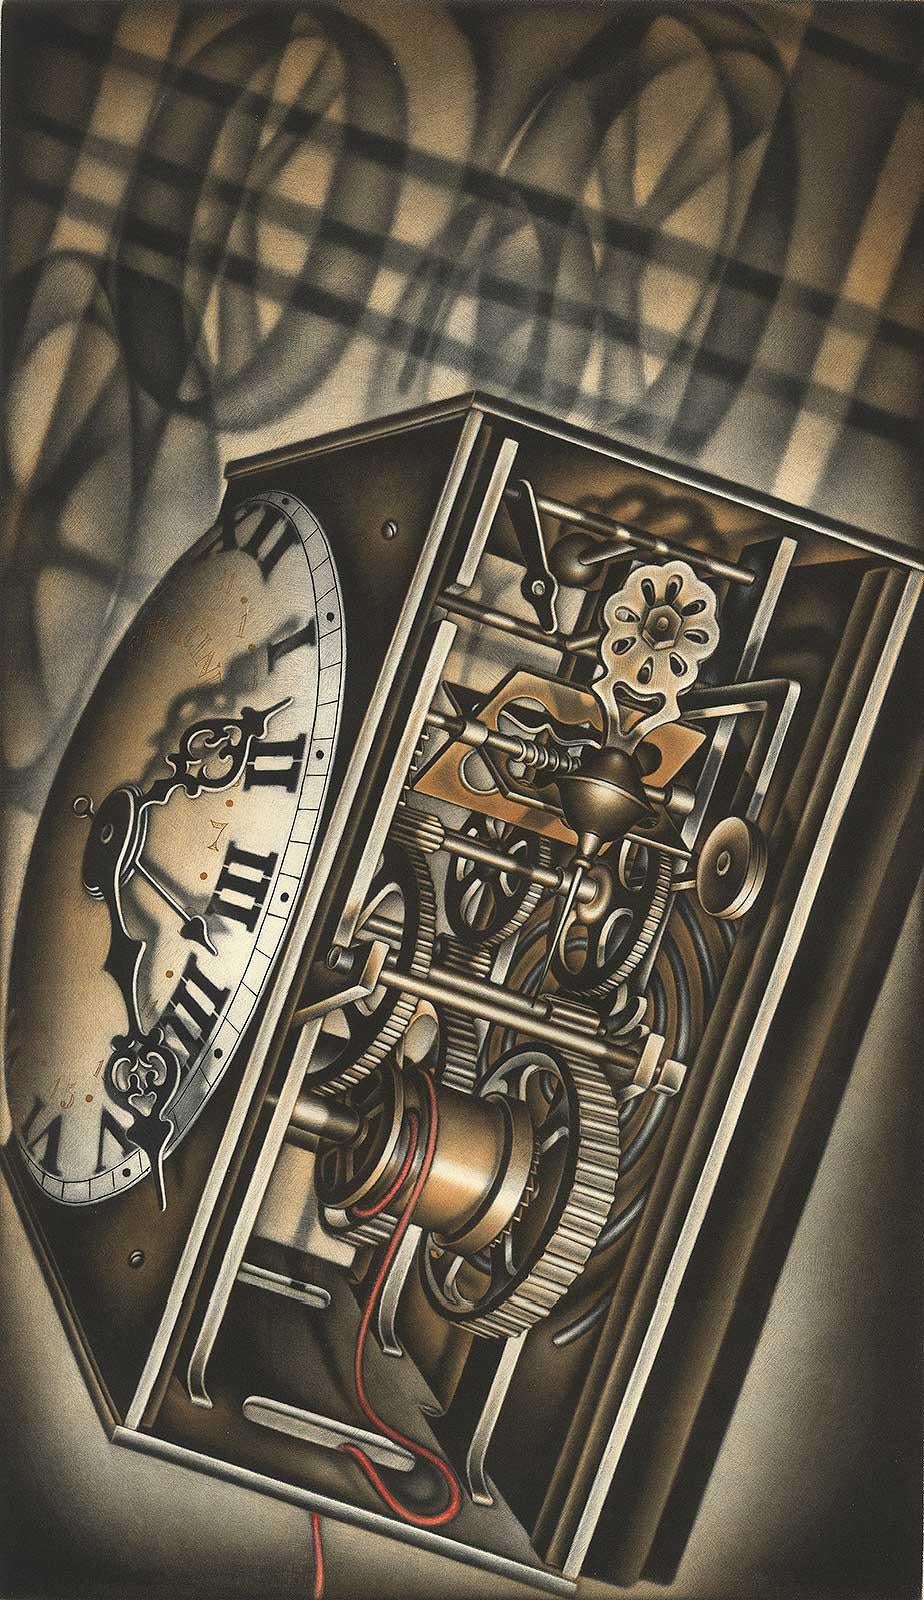 Carol Wax Interior Print - Time Lines (Clock that contrasts delicate hands with stark form of its casing)